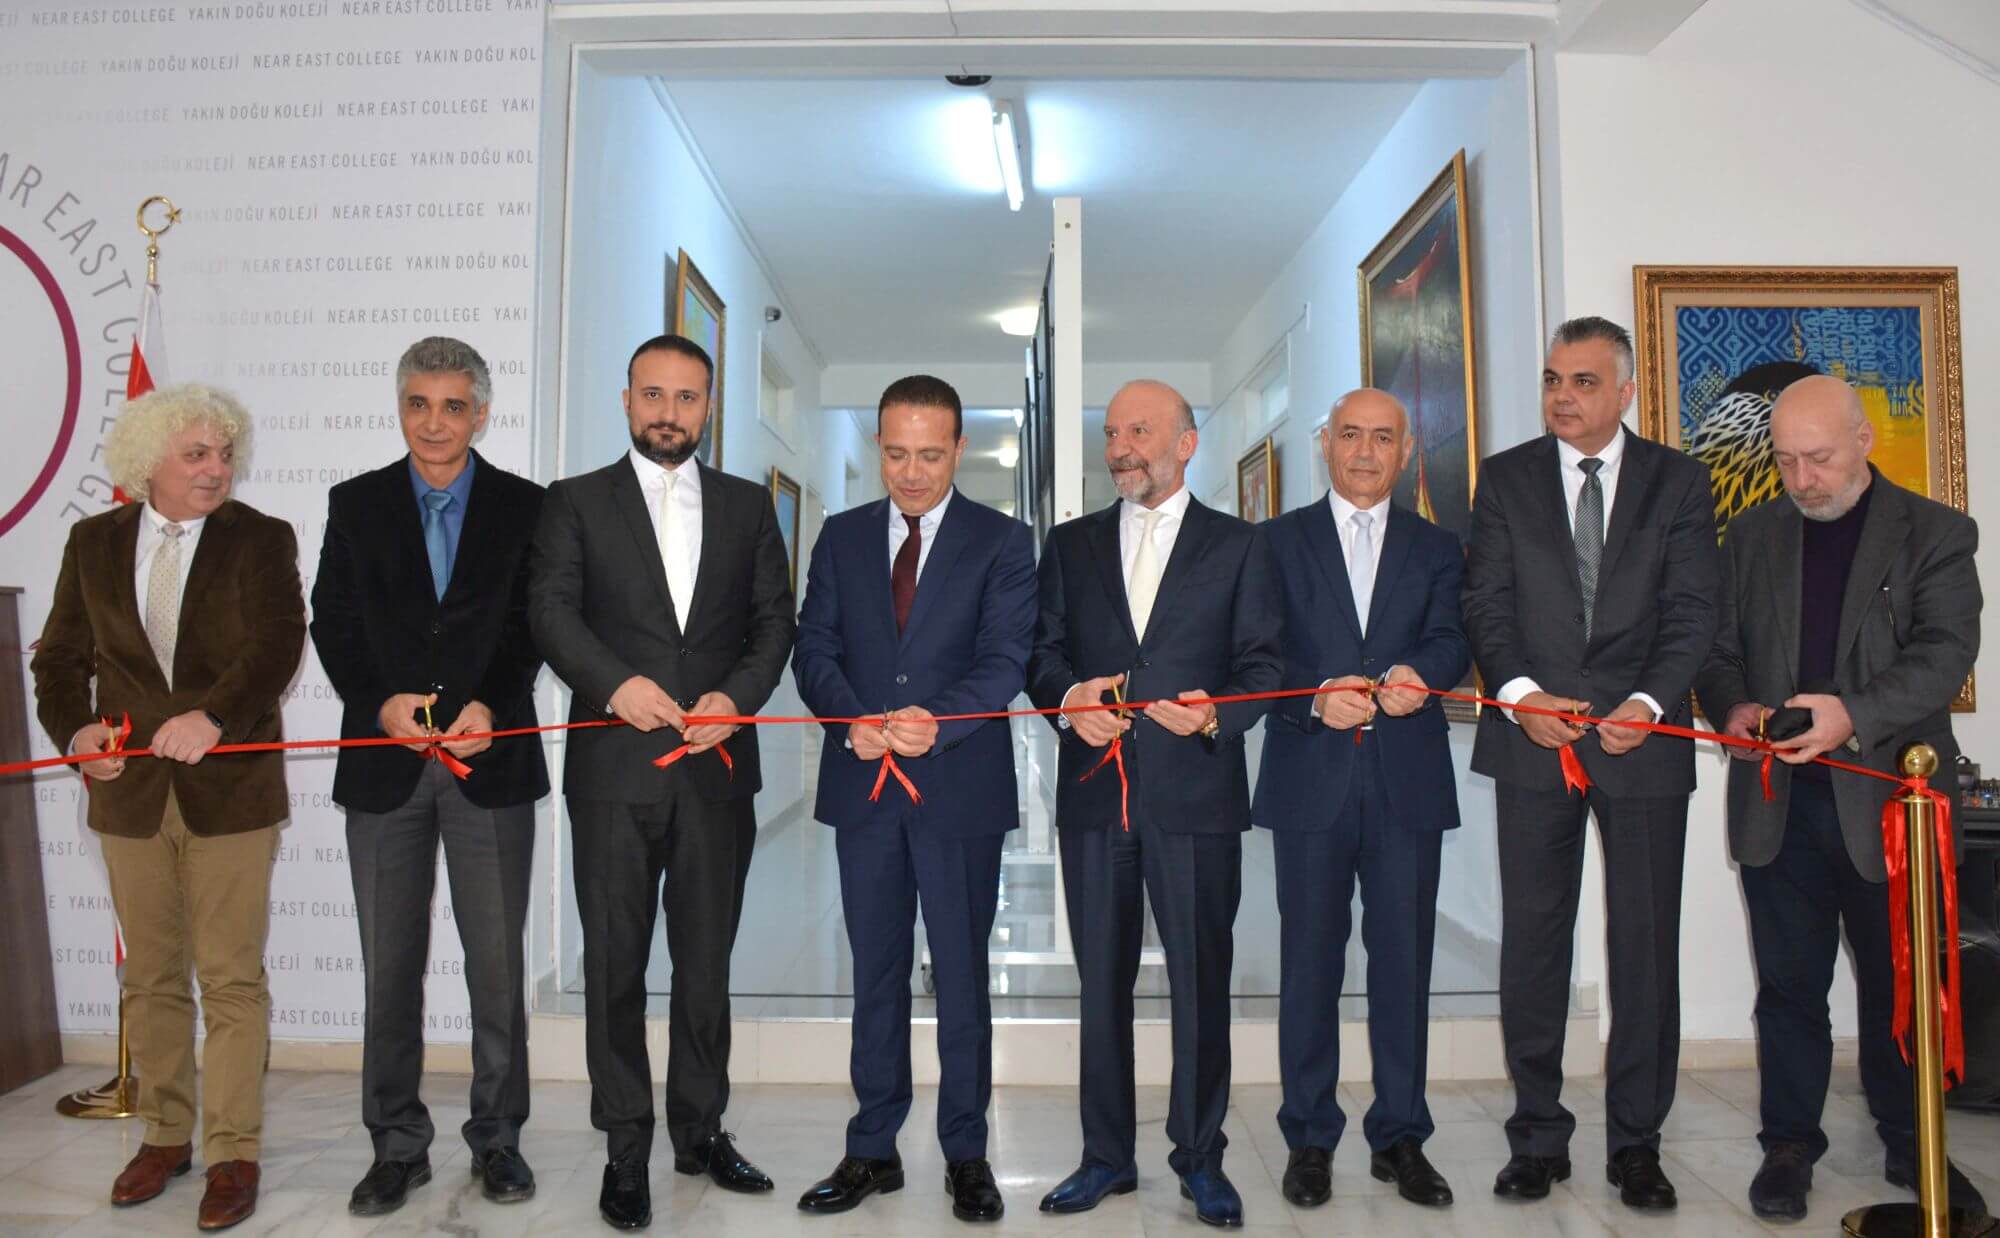 Consisting of 100 Photo-Paintings Created by Ediz Tuncel, the Exhibition titled “Every Nook and Cranny of North Cyprus” was opened by Erkut Şahali, the Minister of Agriculture and Natural Resources